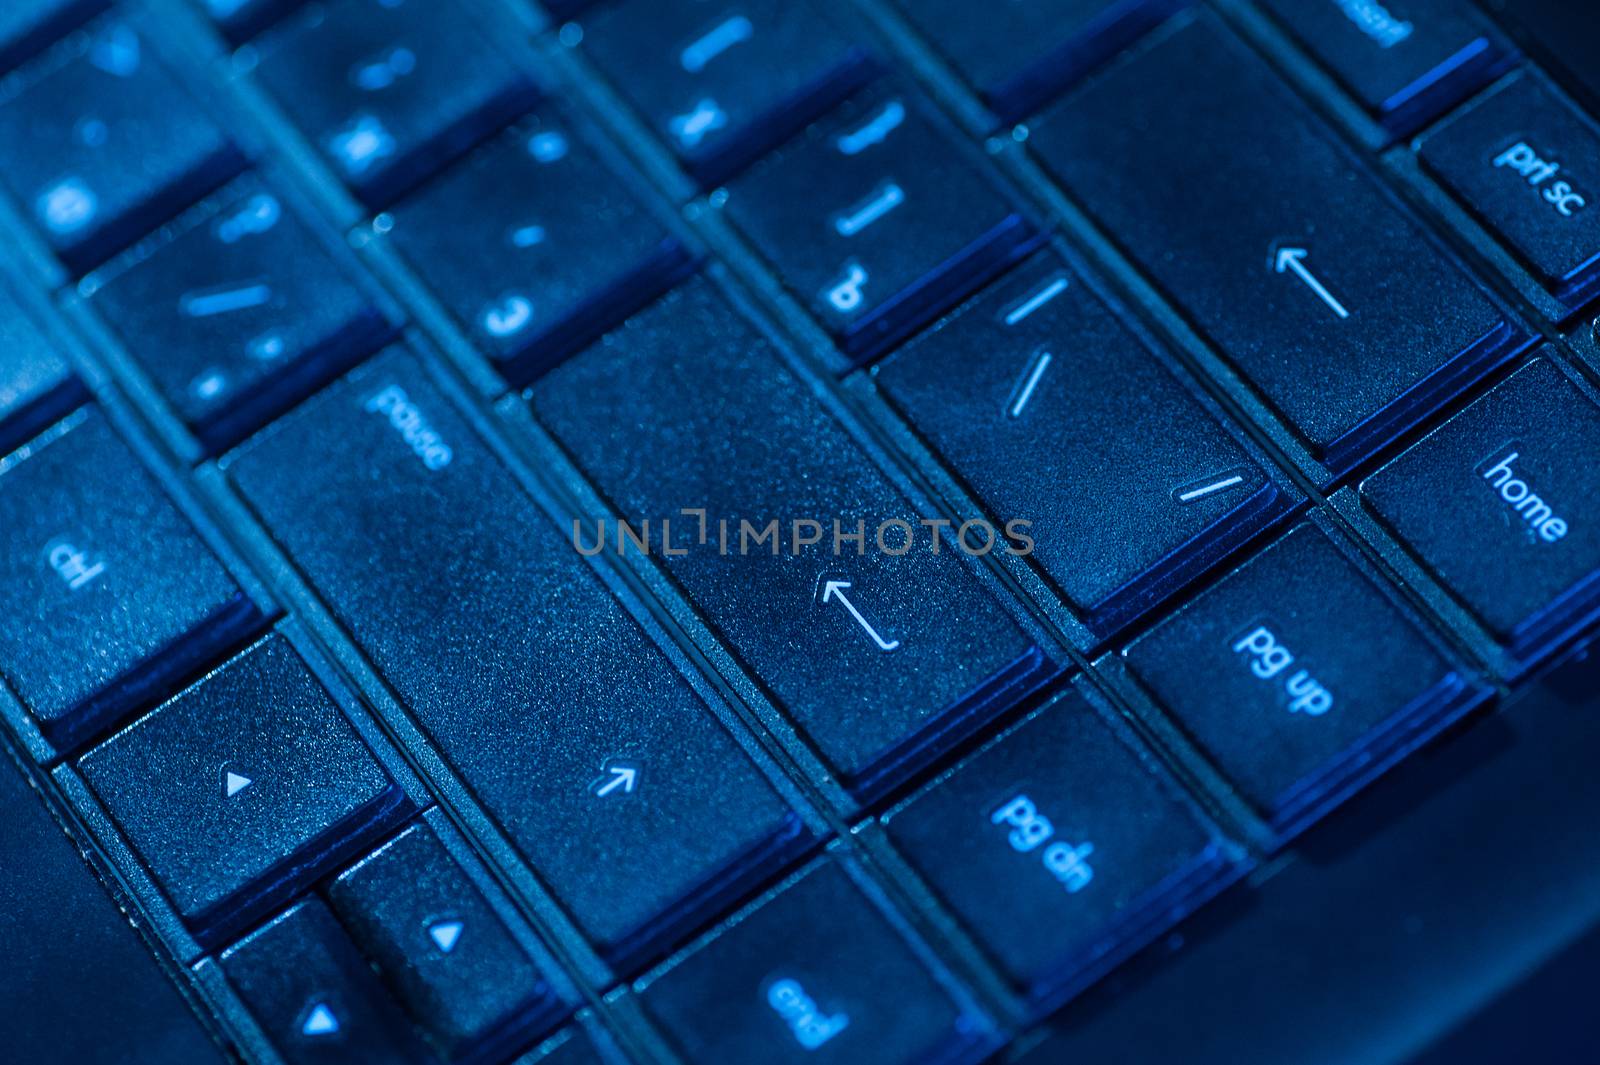 part of the black notebook keyboard on table